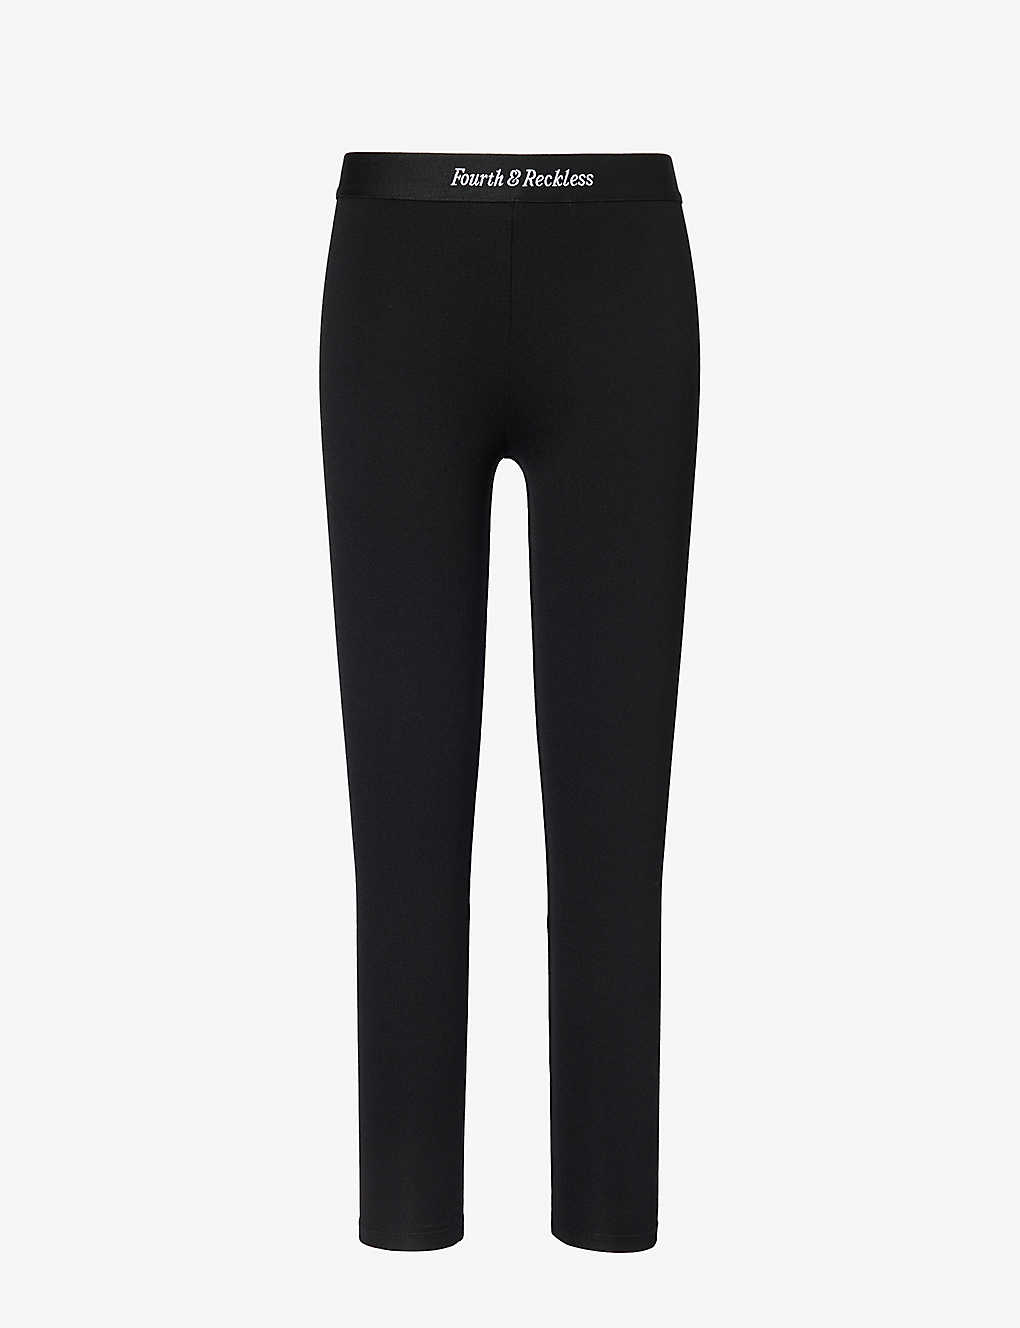 4th & Reckless Amber Logo-waistband Stretch-woven Leggings In Black